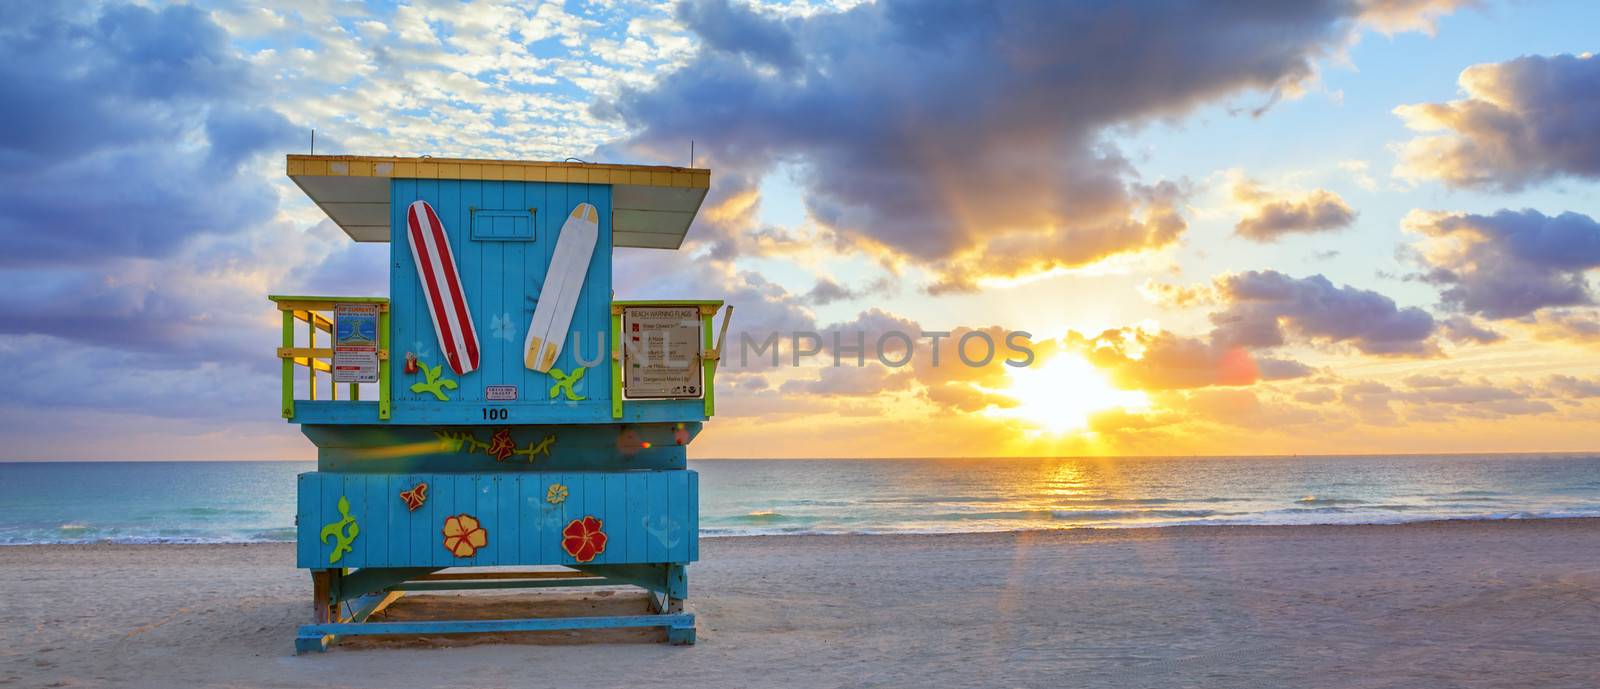 Panoramic view of famous Miami South Beach sunrise by vwalakte